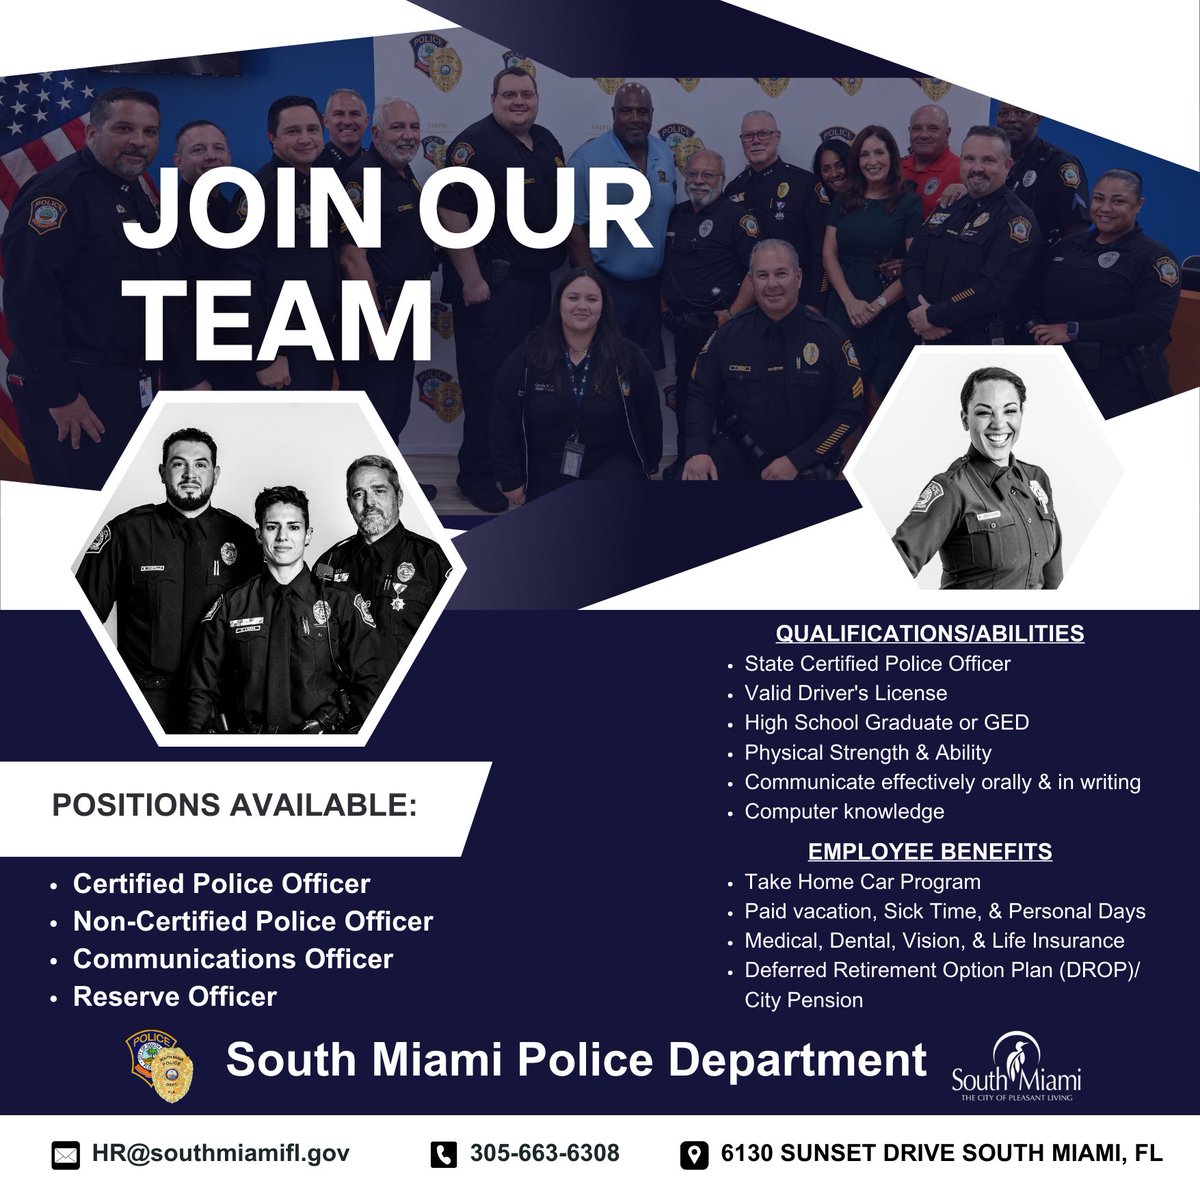 Join our Team, Now Hiring! .
#Police #policejobs  #hiringpolicesomiamipd #PoliceOfficers #PoliceFamily #PoliceChase #PoliceInterceptor #PoliceLife #PolicePics #PoliceDepartment #PoliceCars #CityLiving #PleasantLiving #SouthMiami #Government #Miami #MiamiDade #Southmiamijobs